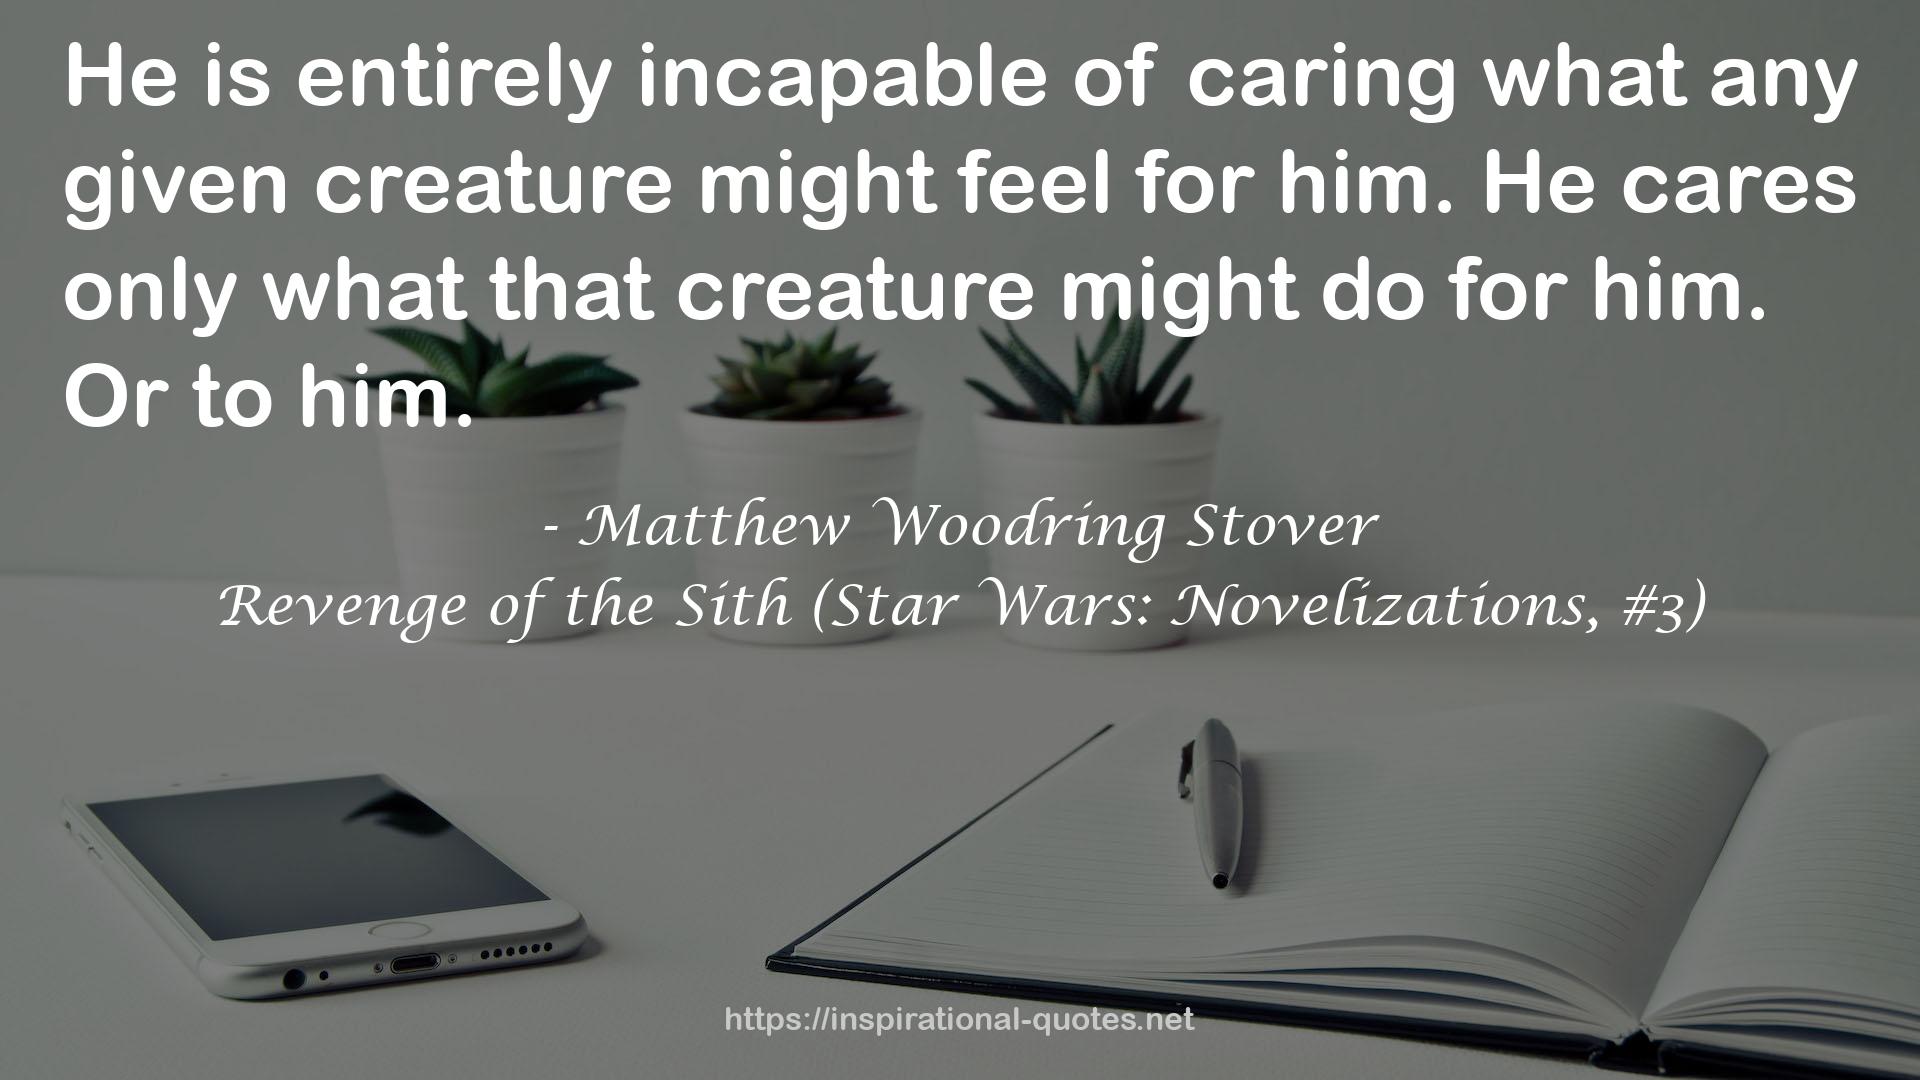 Matthew Woodring Stover QUOTES